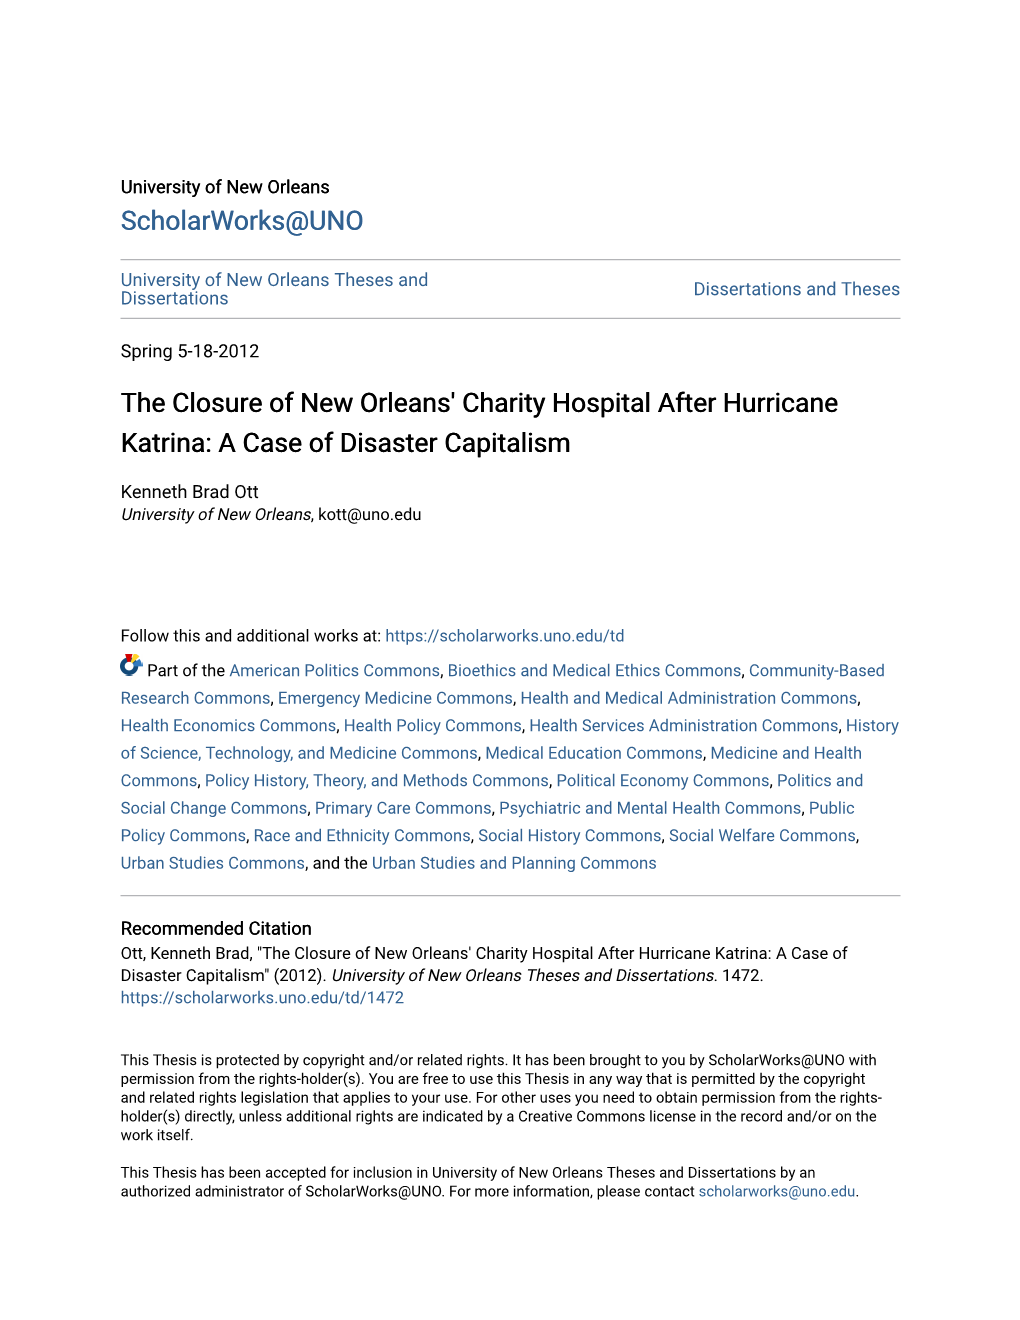 The Closure of New Orleans' Charity Hospital After Hurricane Katrina: a Case of Disaster Capitalism